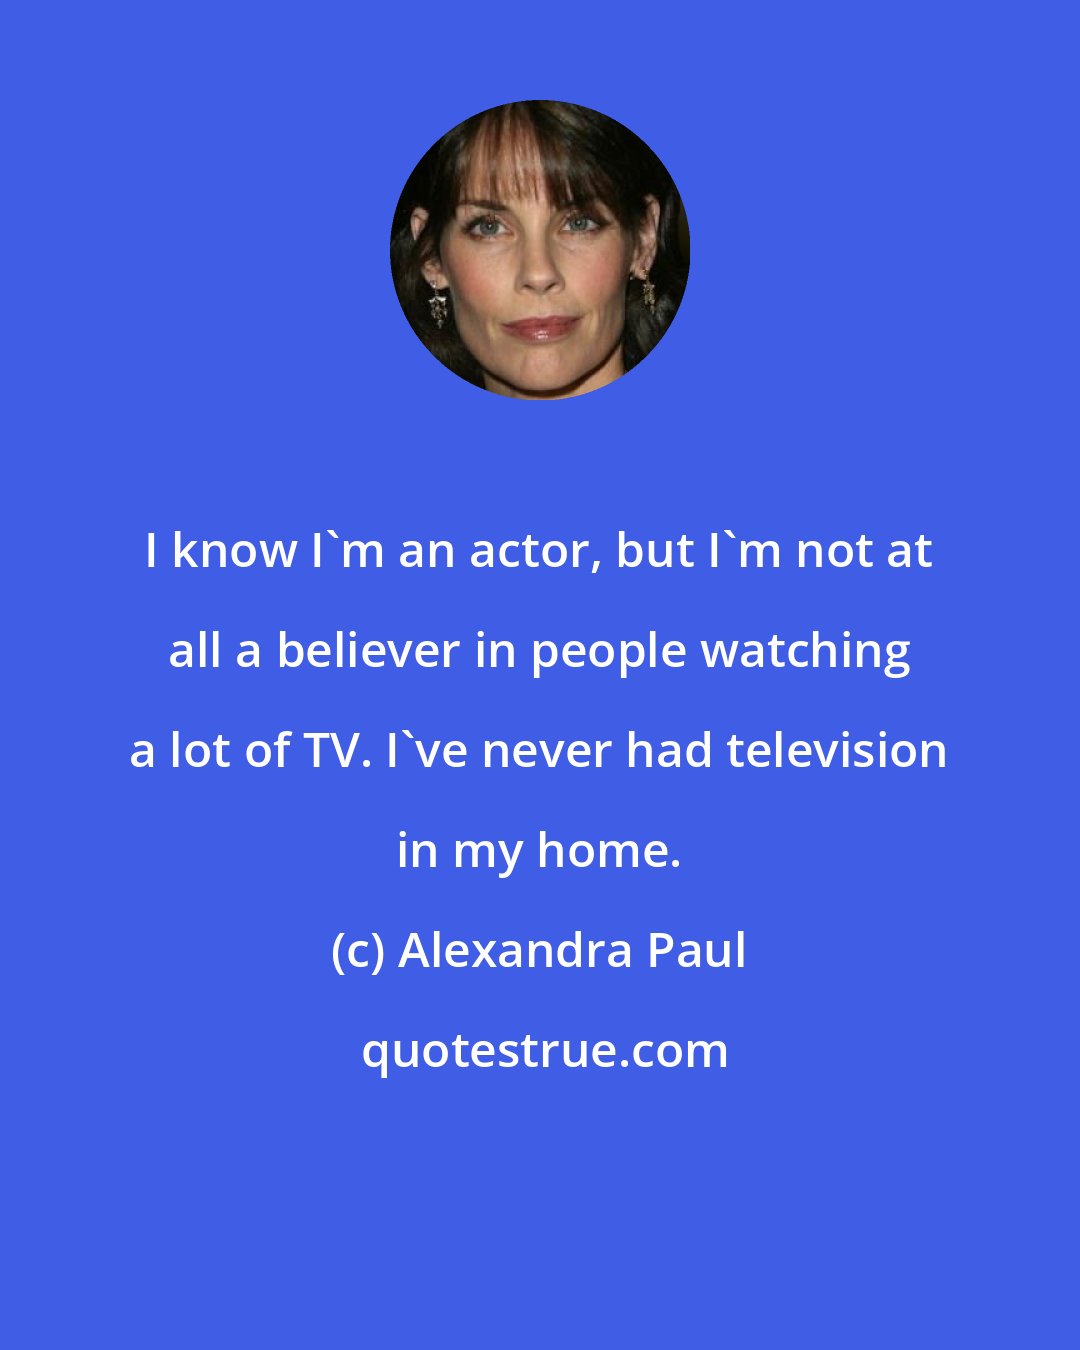 Alexandra Paul: I know I'm an actor, but I'm not at all a believer in people watching a lot of TV. I've never had television in my home.